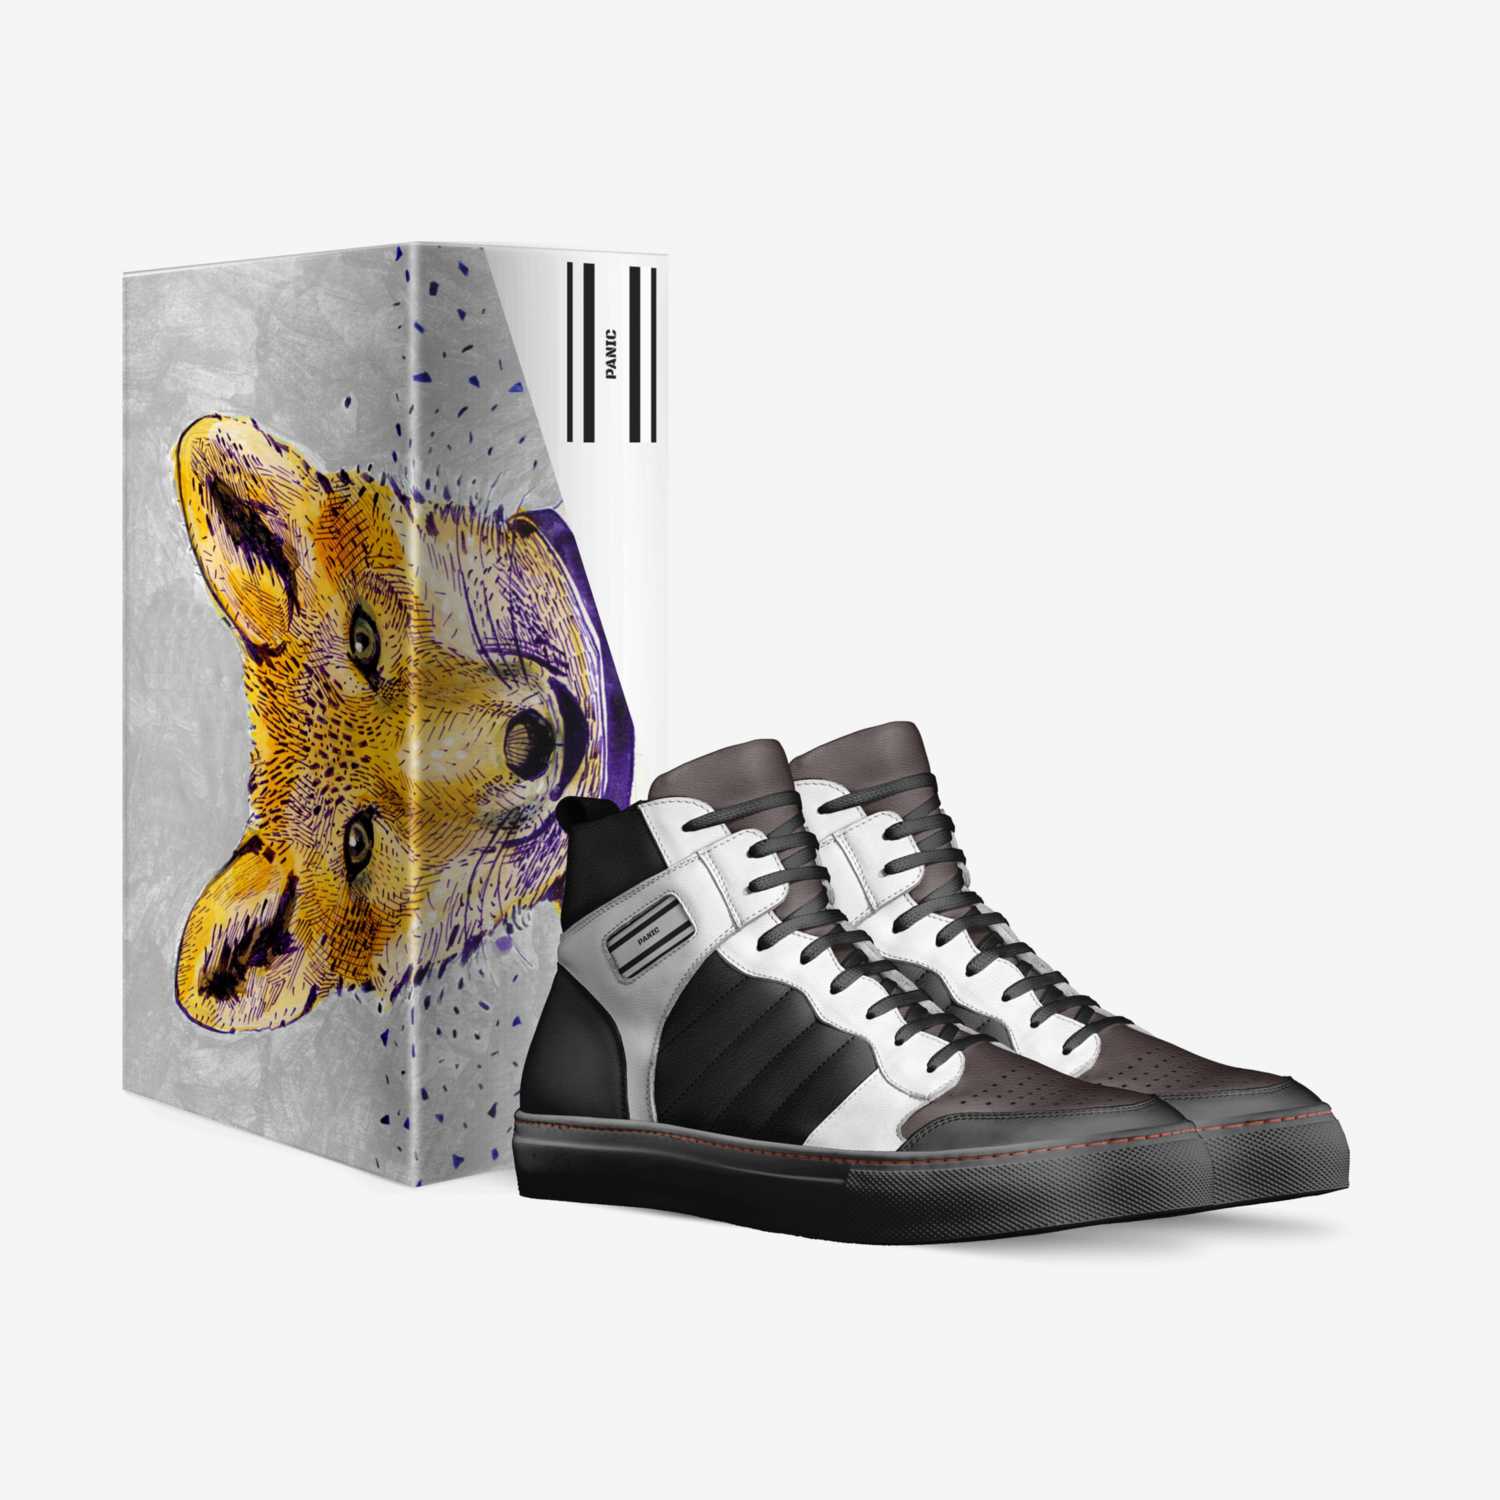 PANIC custom made in Italy shoes by Simon Barr | Box view